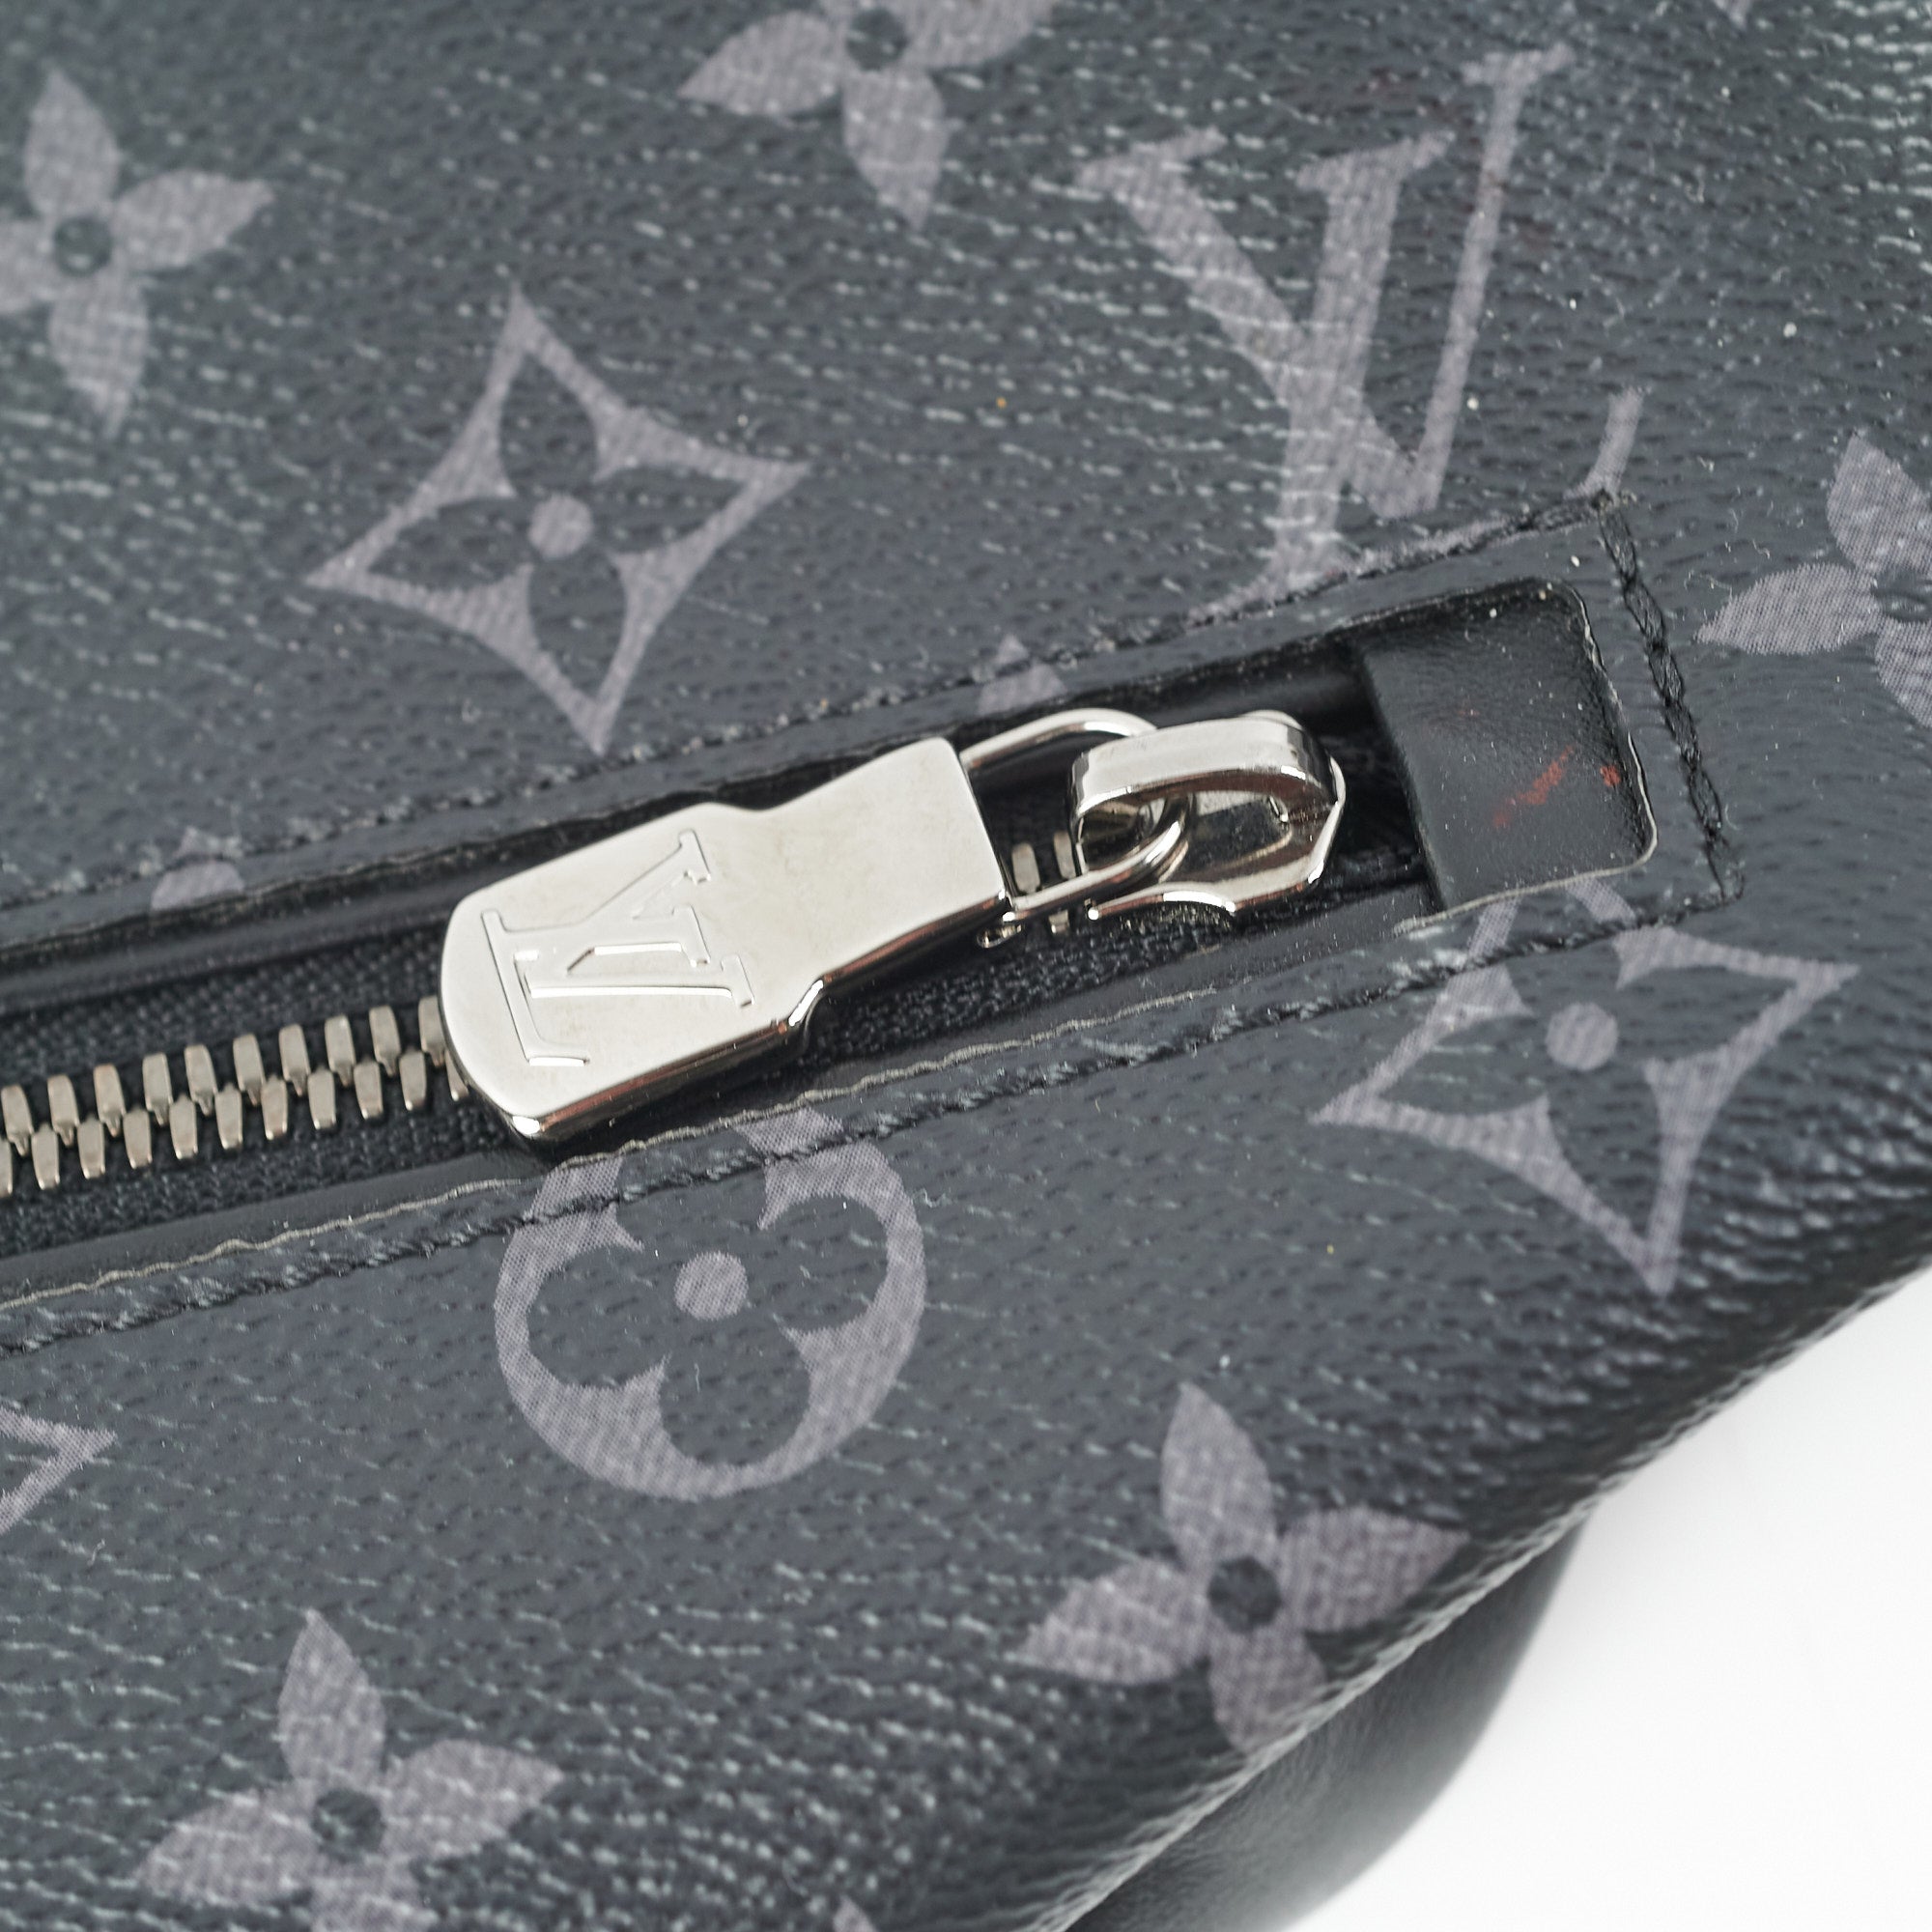 Shop Louis Vuitton Discovery Discovery bumbag pm (M46036, M46108) by 環-WA